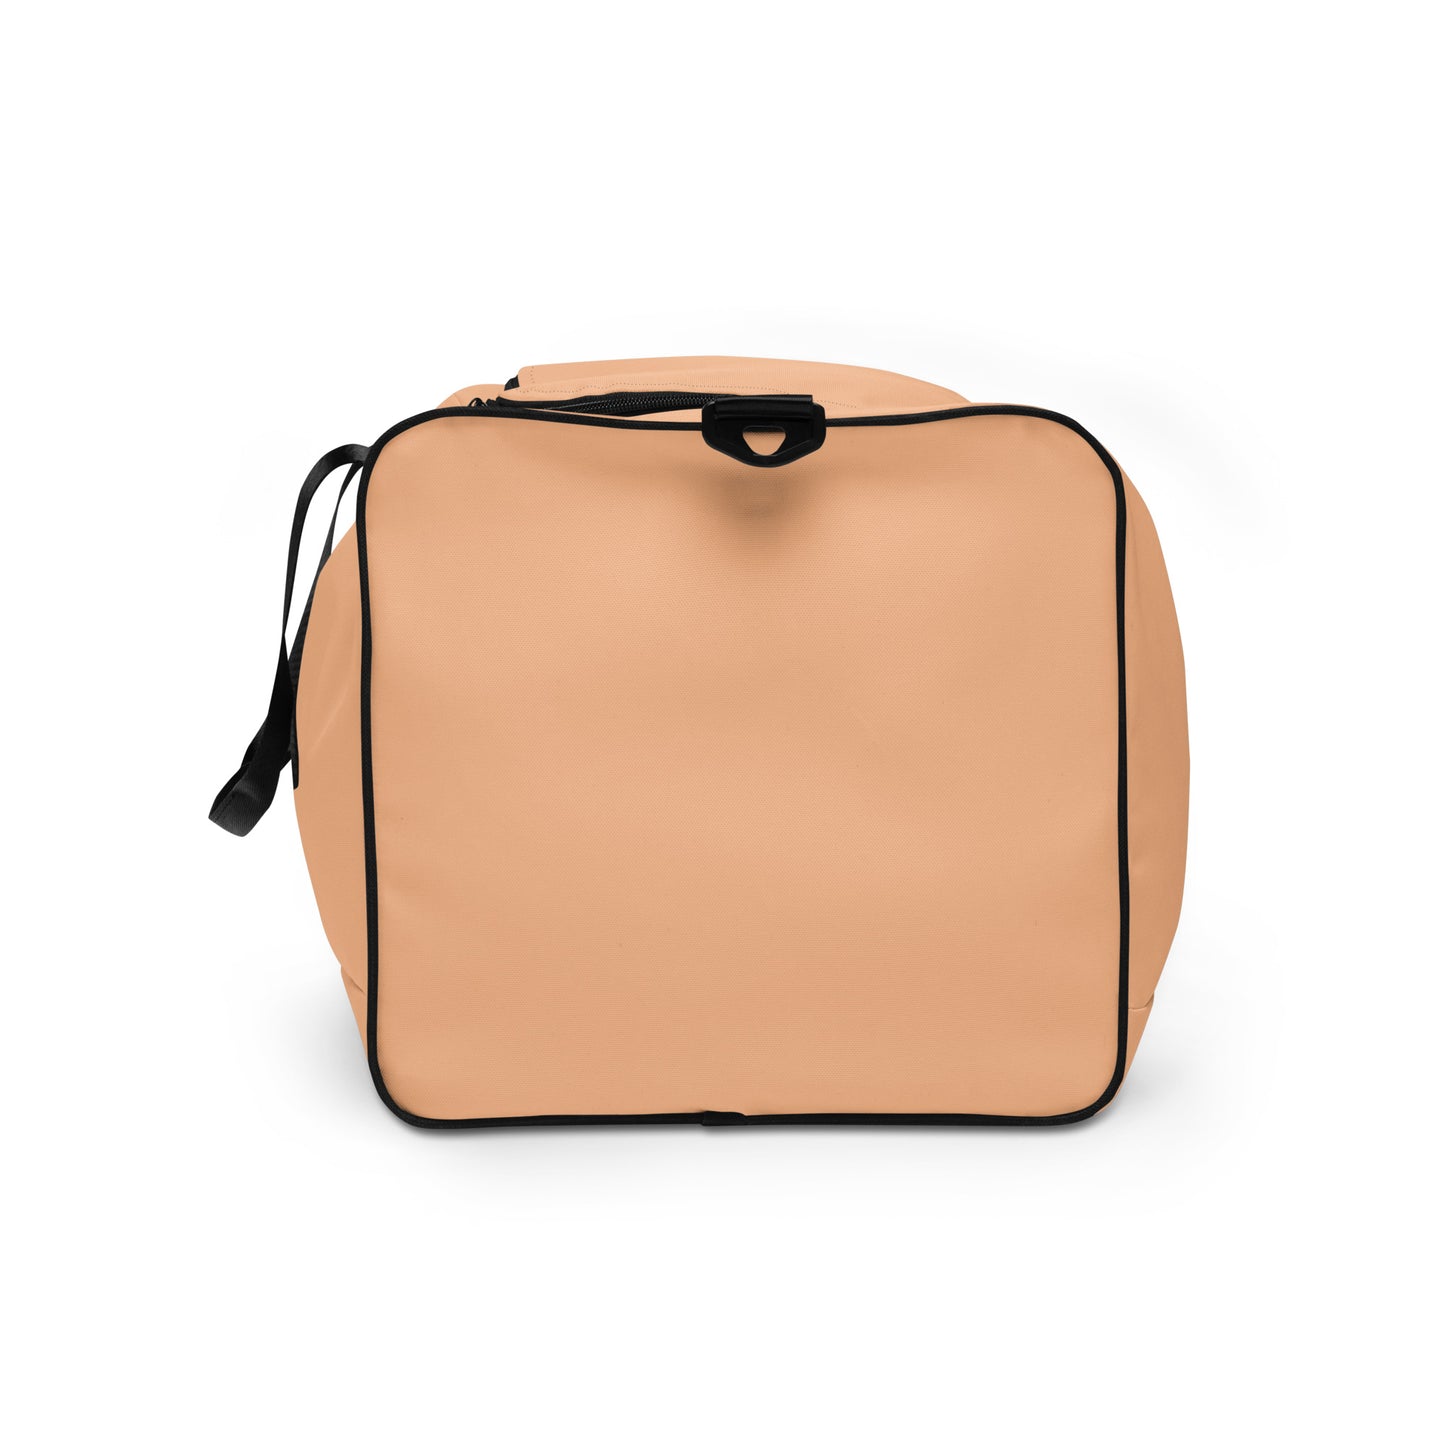 Apricot - Sustainably Made Duffle Bag